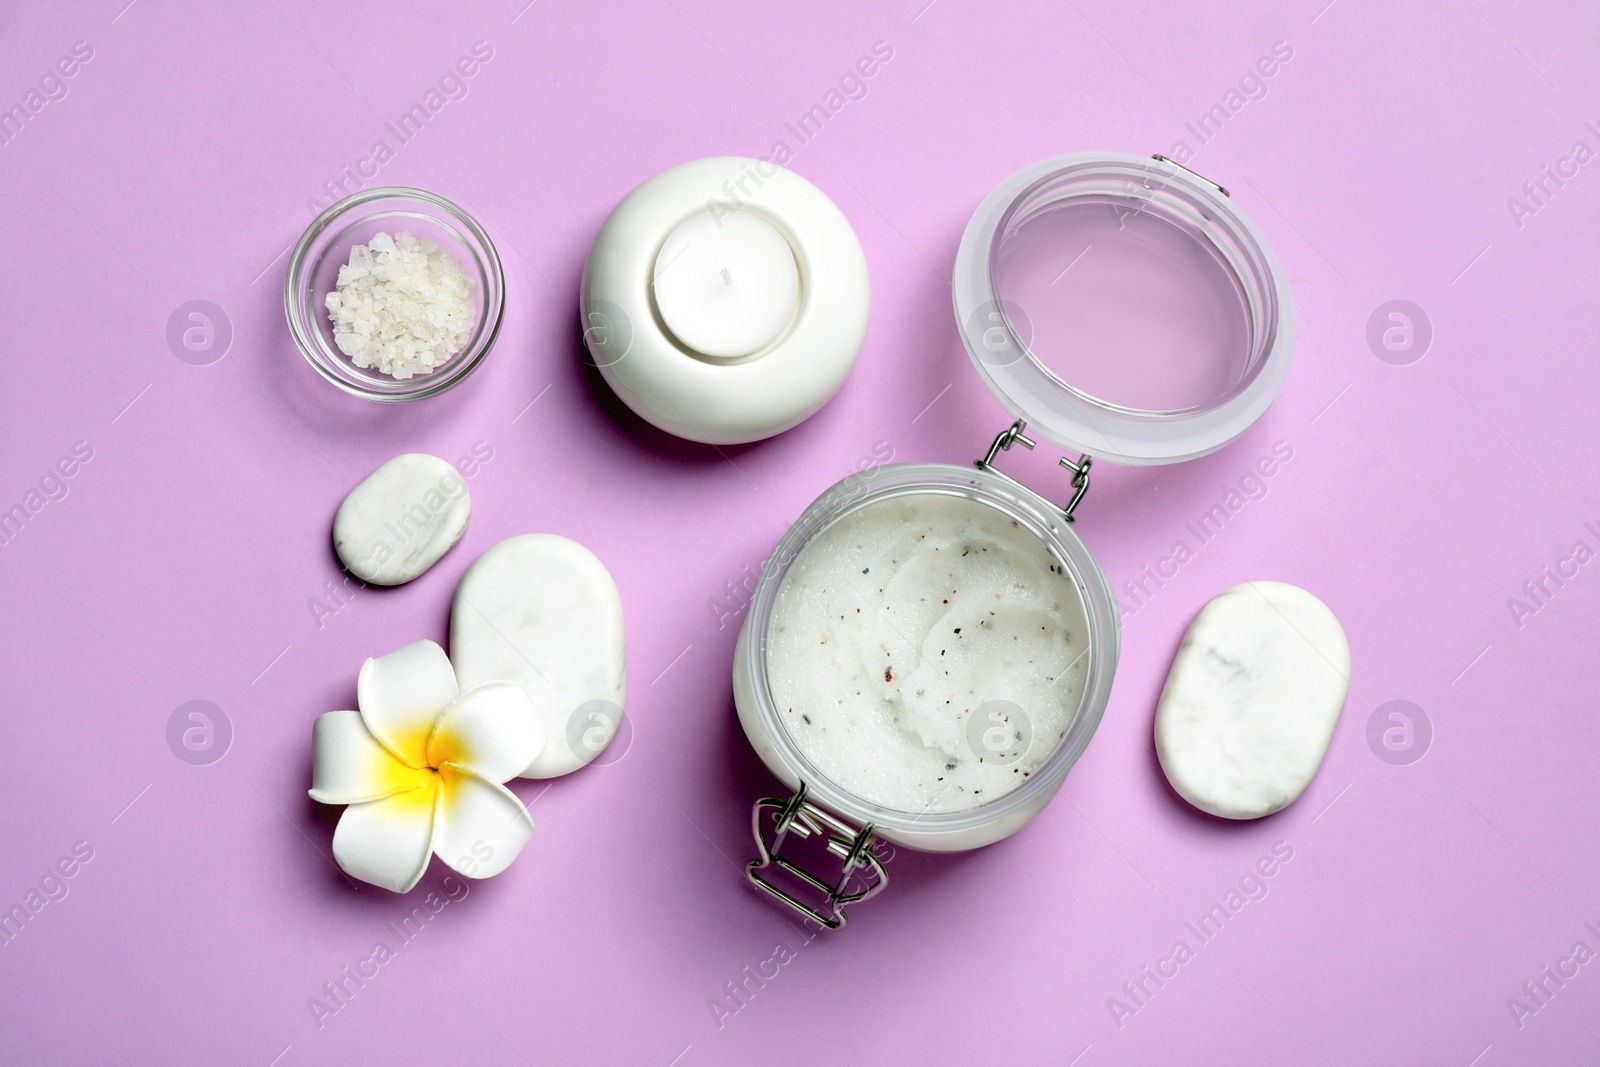 Photo of Flat lay composition with body scrub and plumeria flower on pale violet background